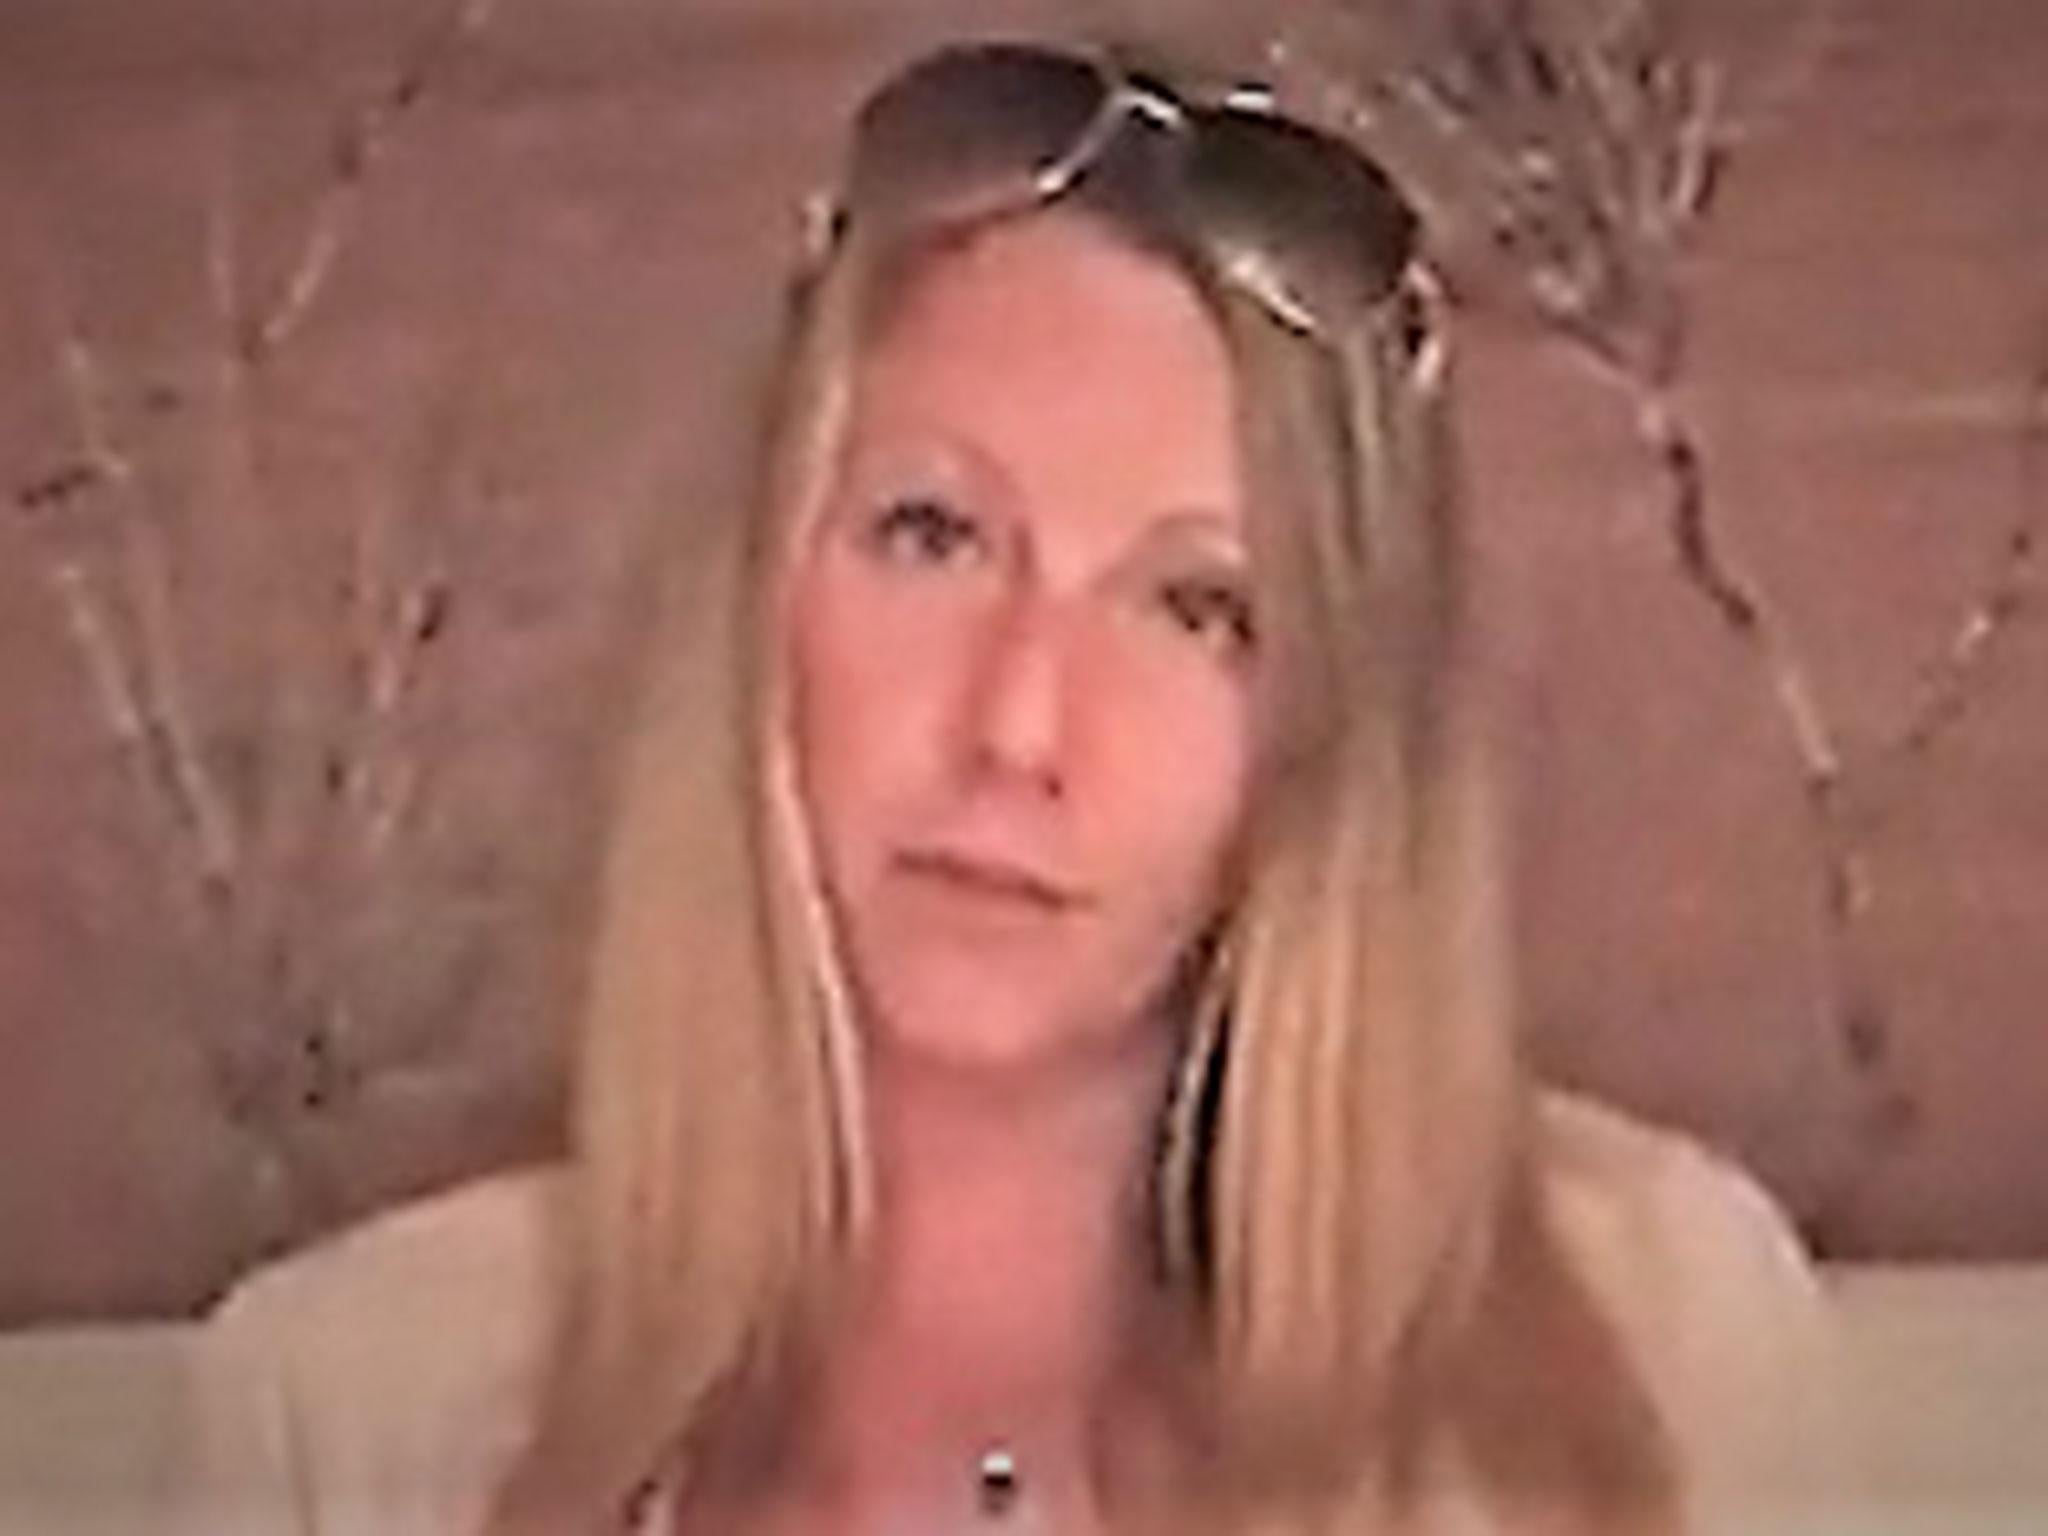 Melanie Batty, 37, does not have parental guardianship of Alex and is suspected of kidnapping her son